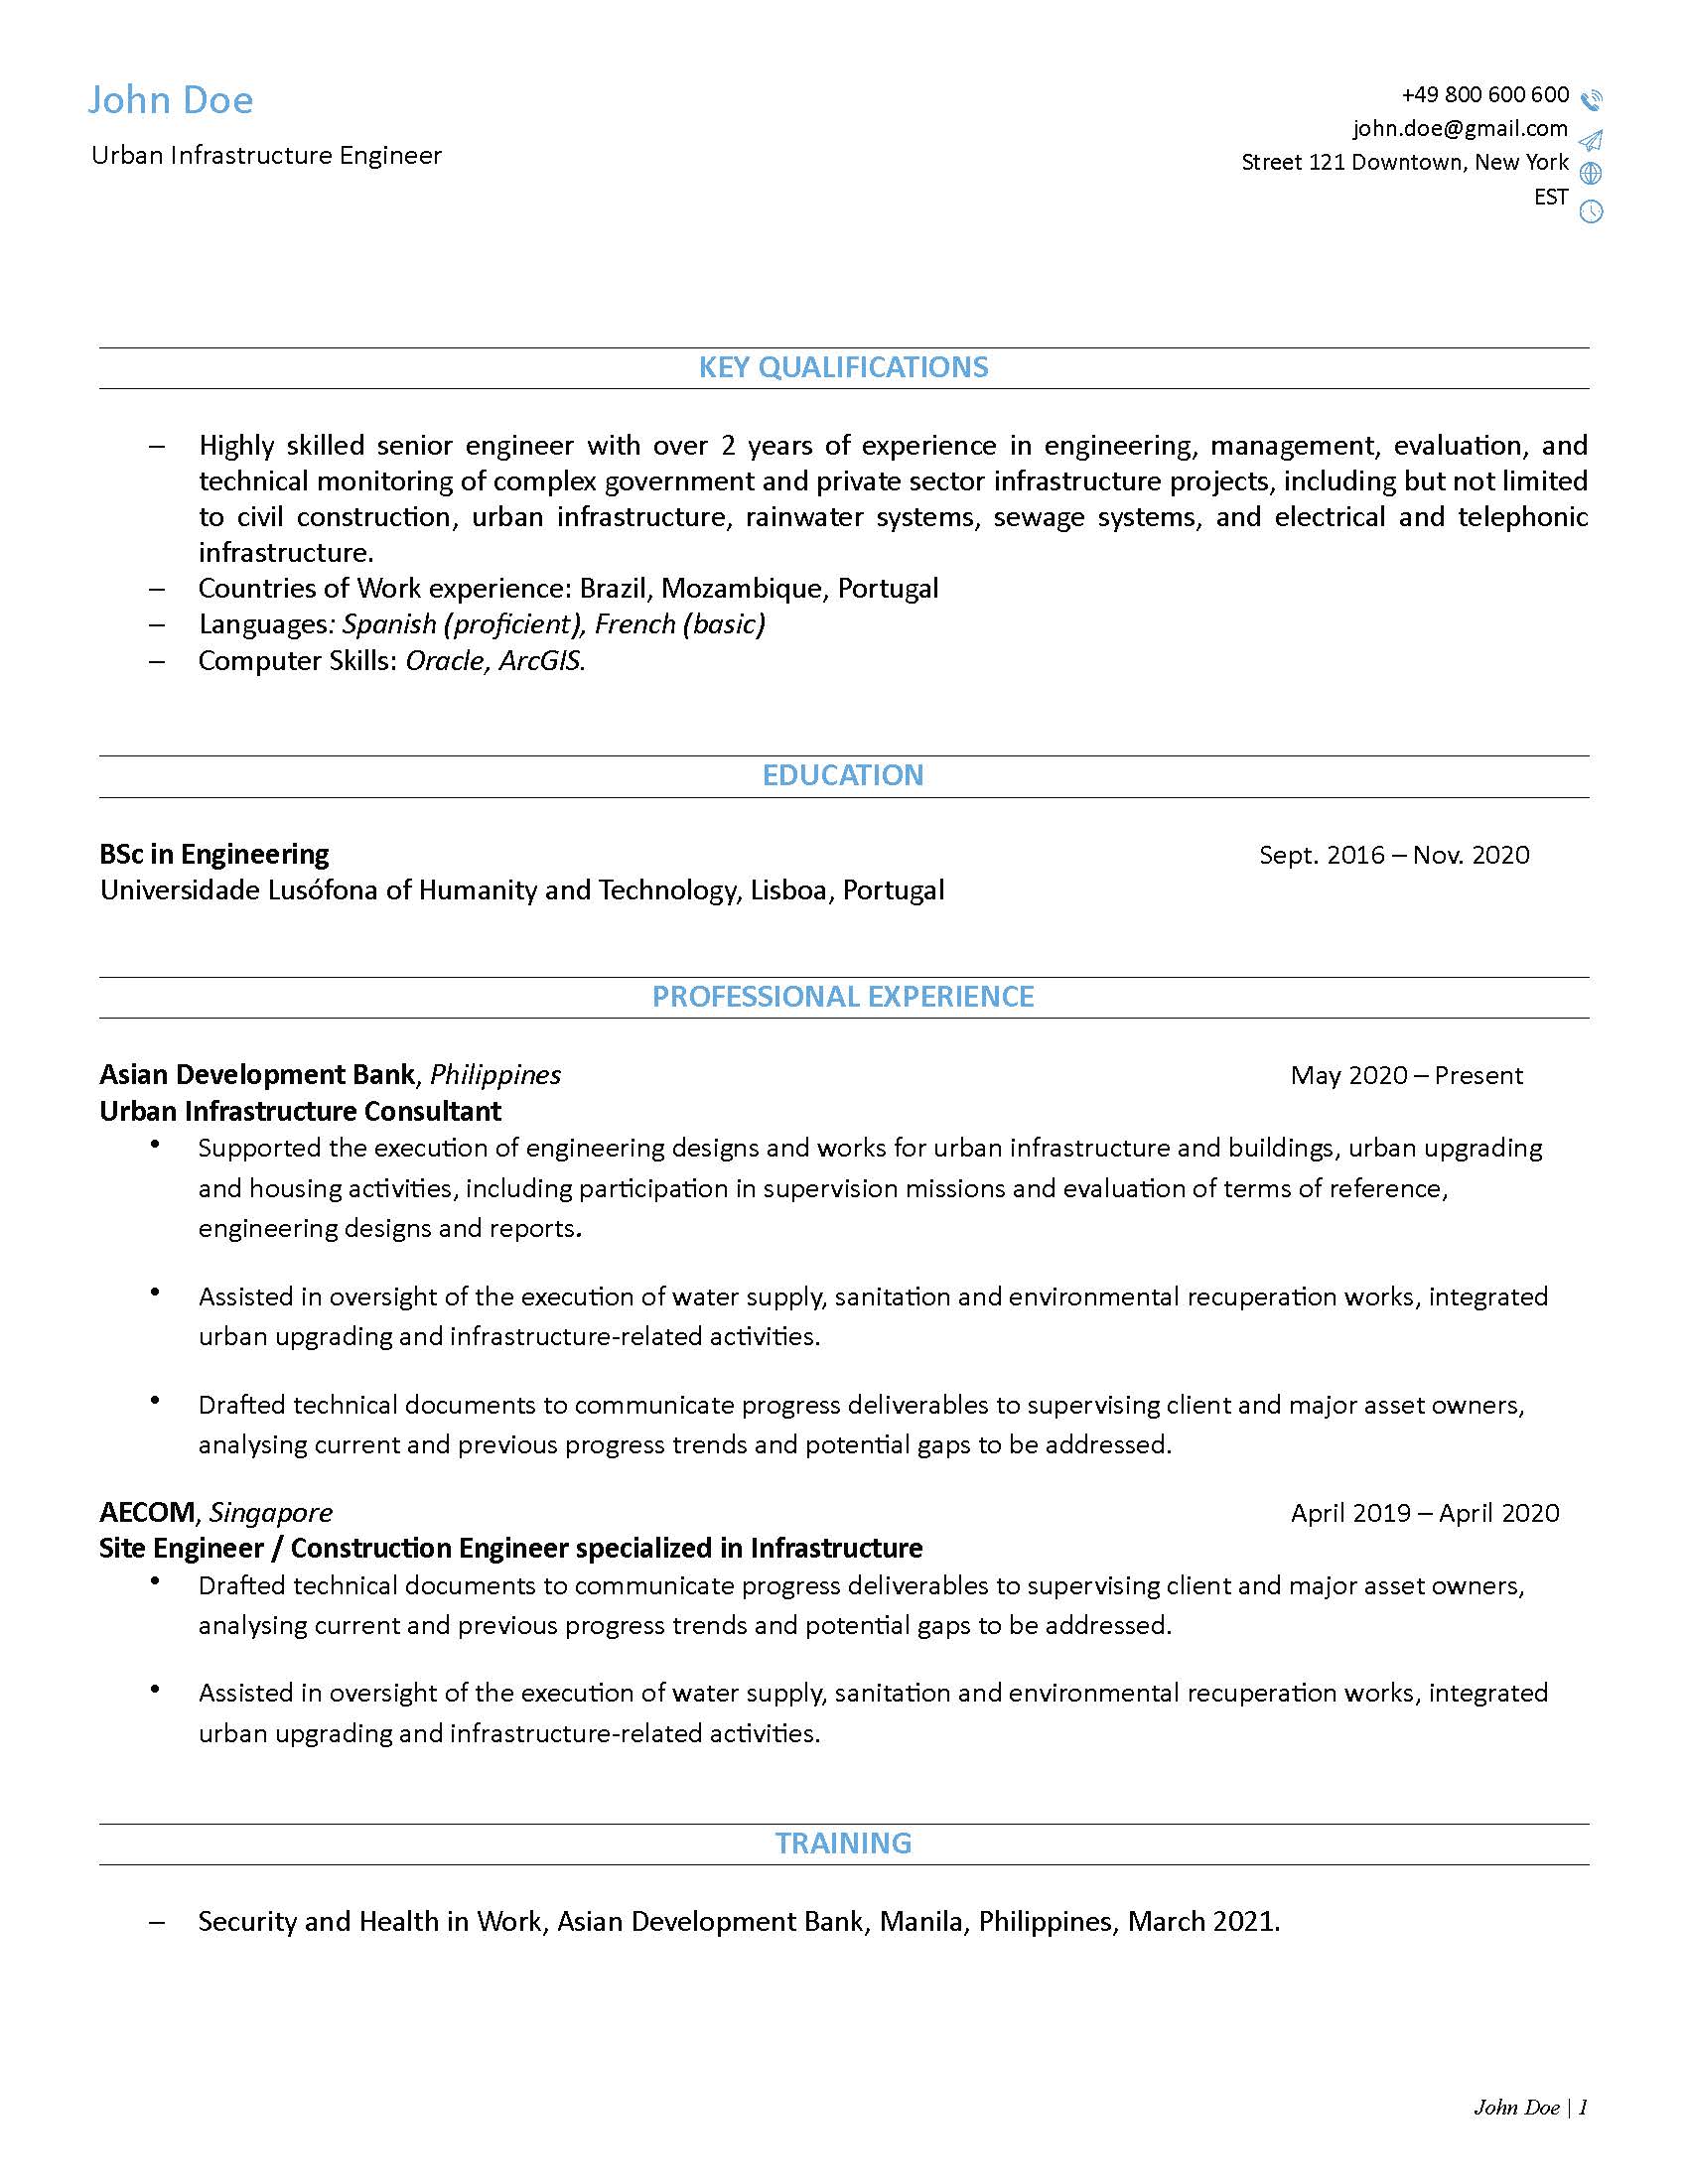 Entry to Mid Level CV Template